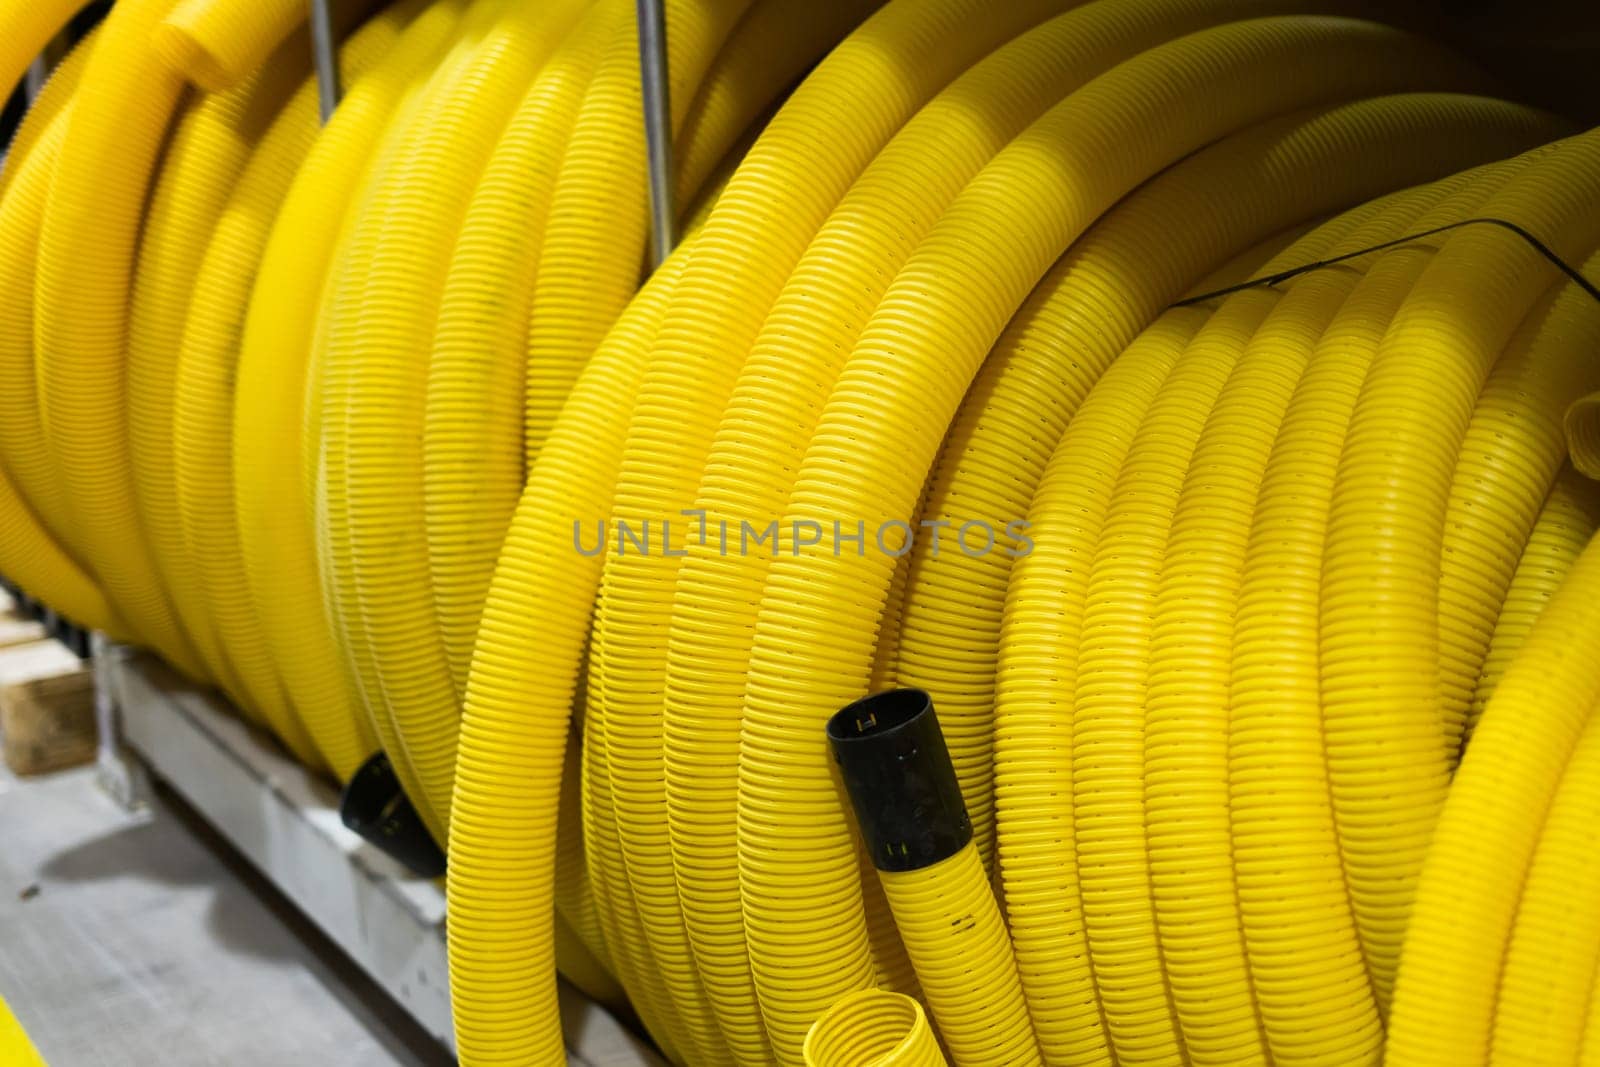 Large roll of plastic corrugated pipe for insulating electrical wires by Zelenin